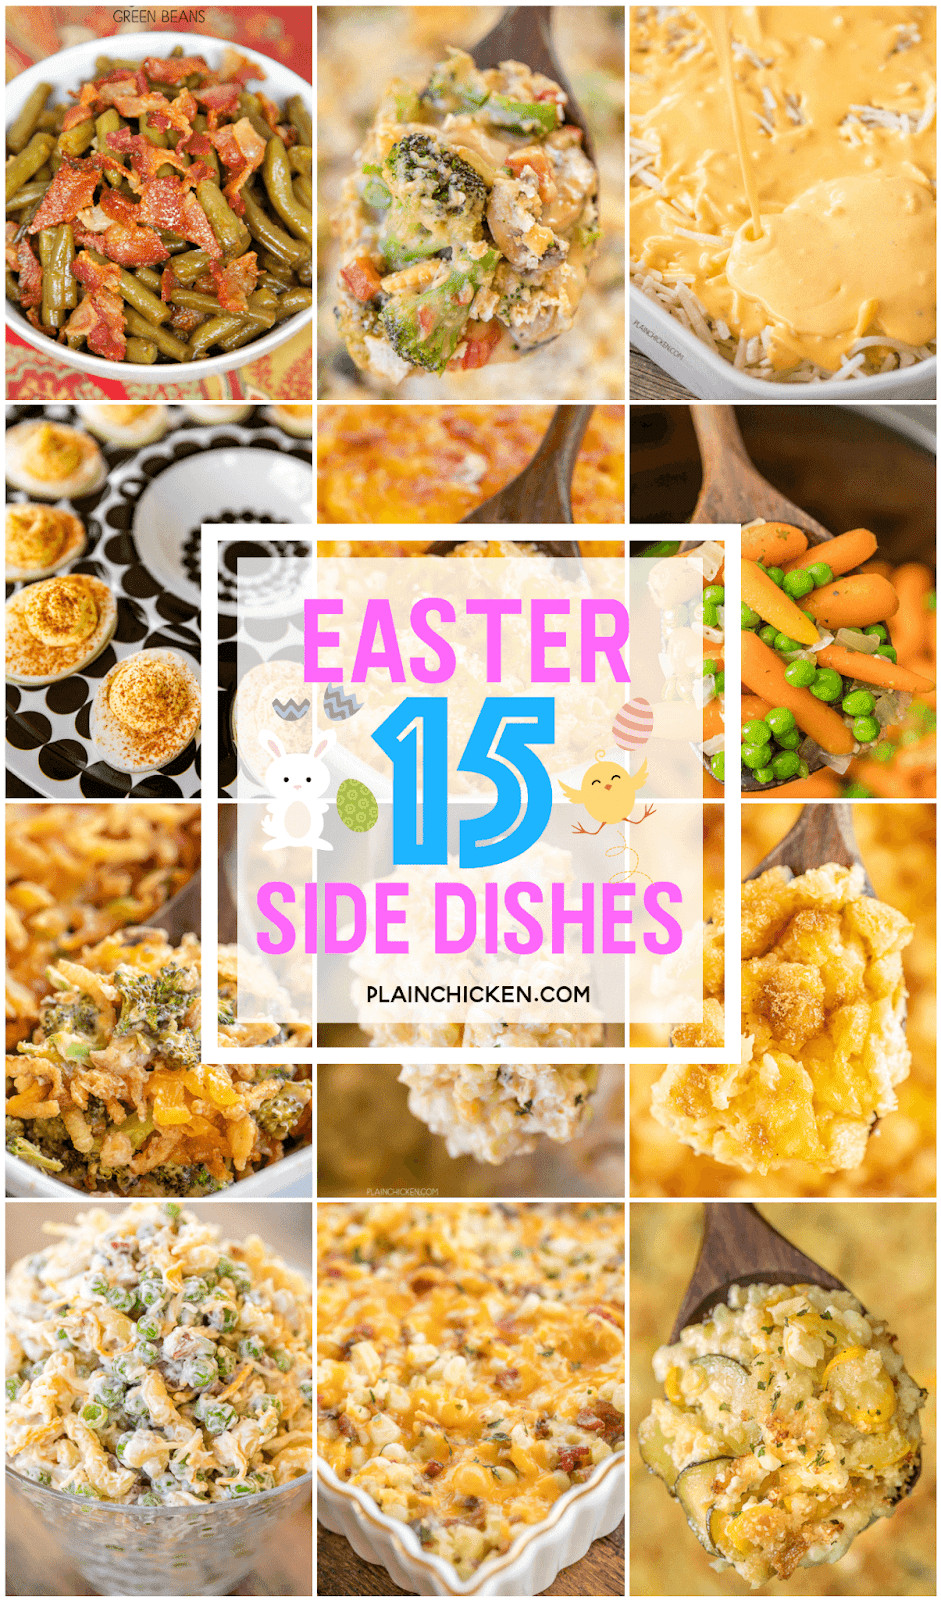 Traditional Easter Dinner Sides
 Top 15 Side Dishes for Easter Dinner Plain Chicken